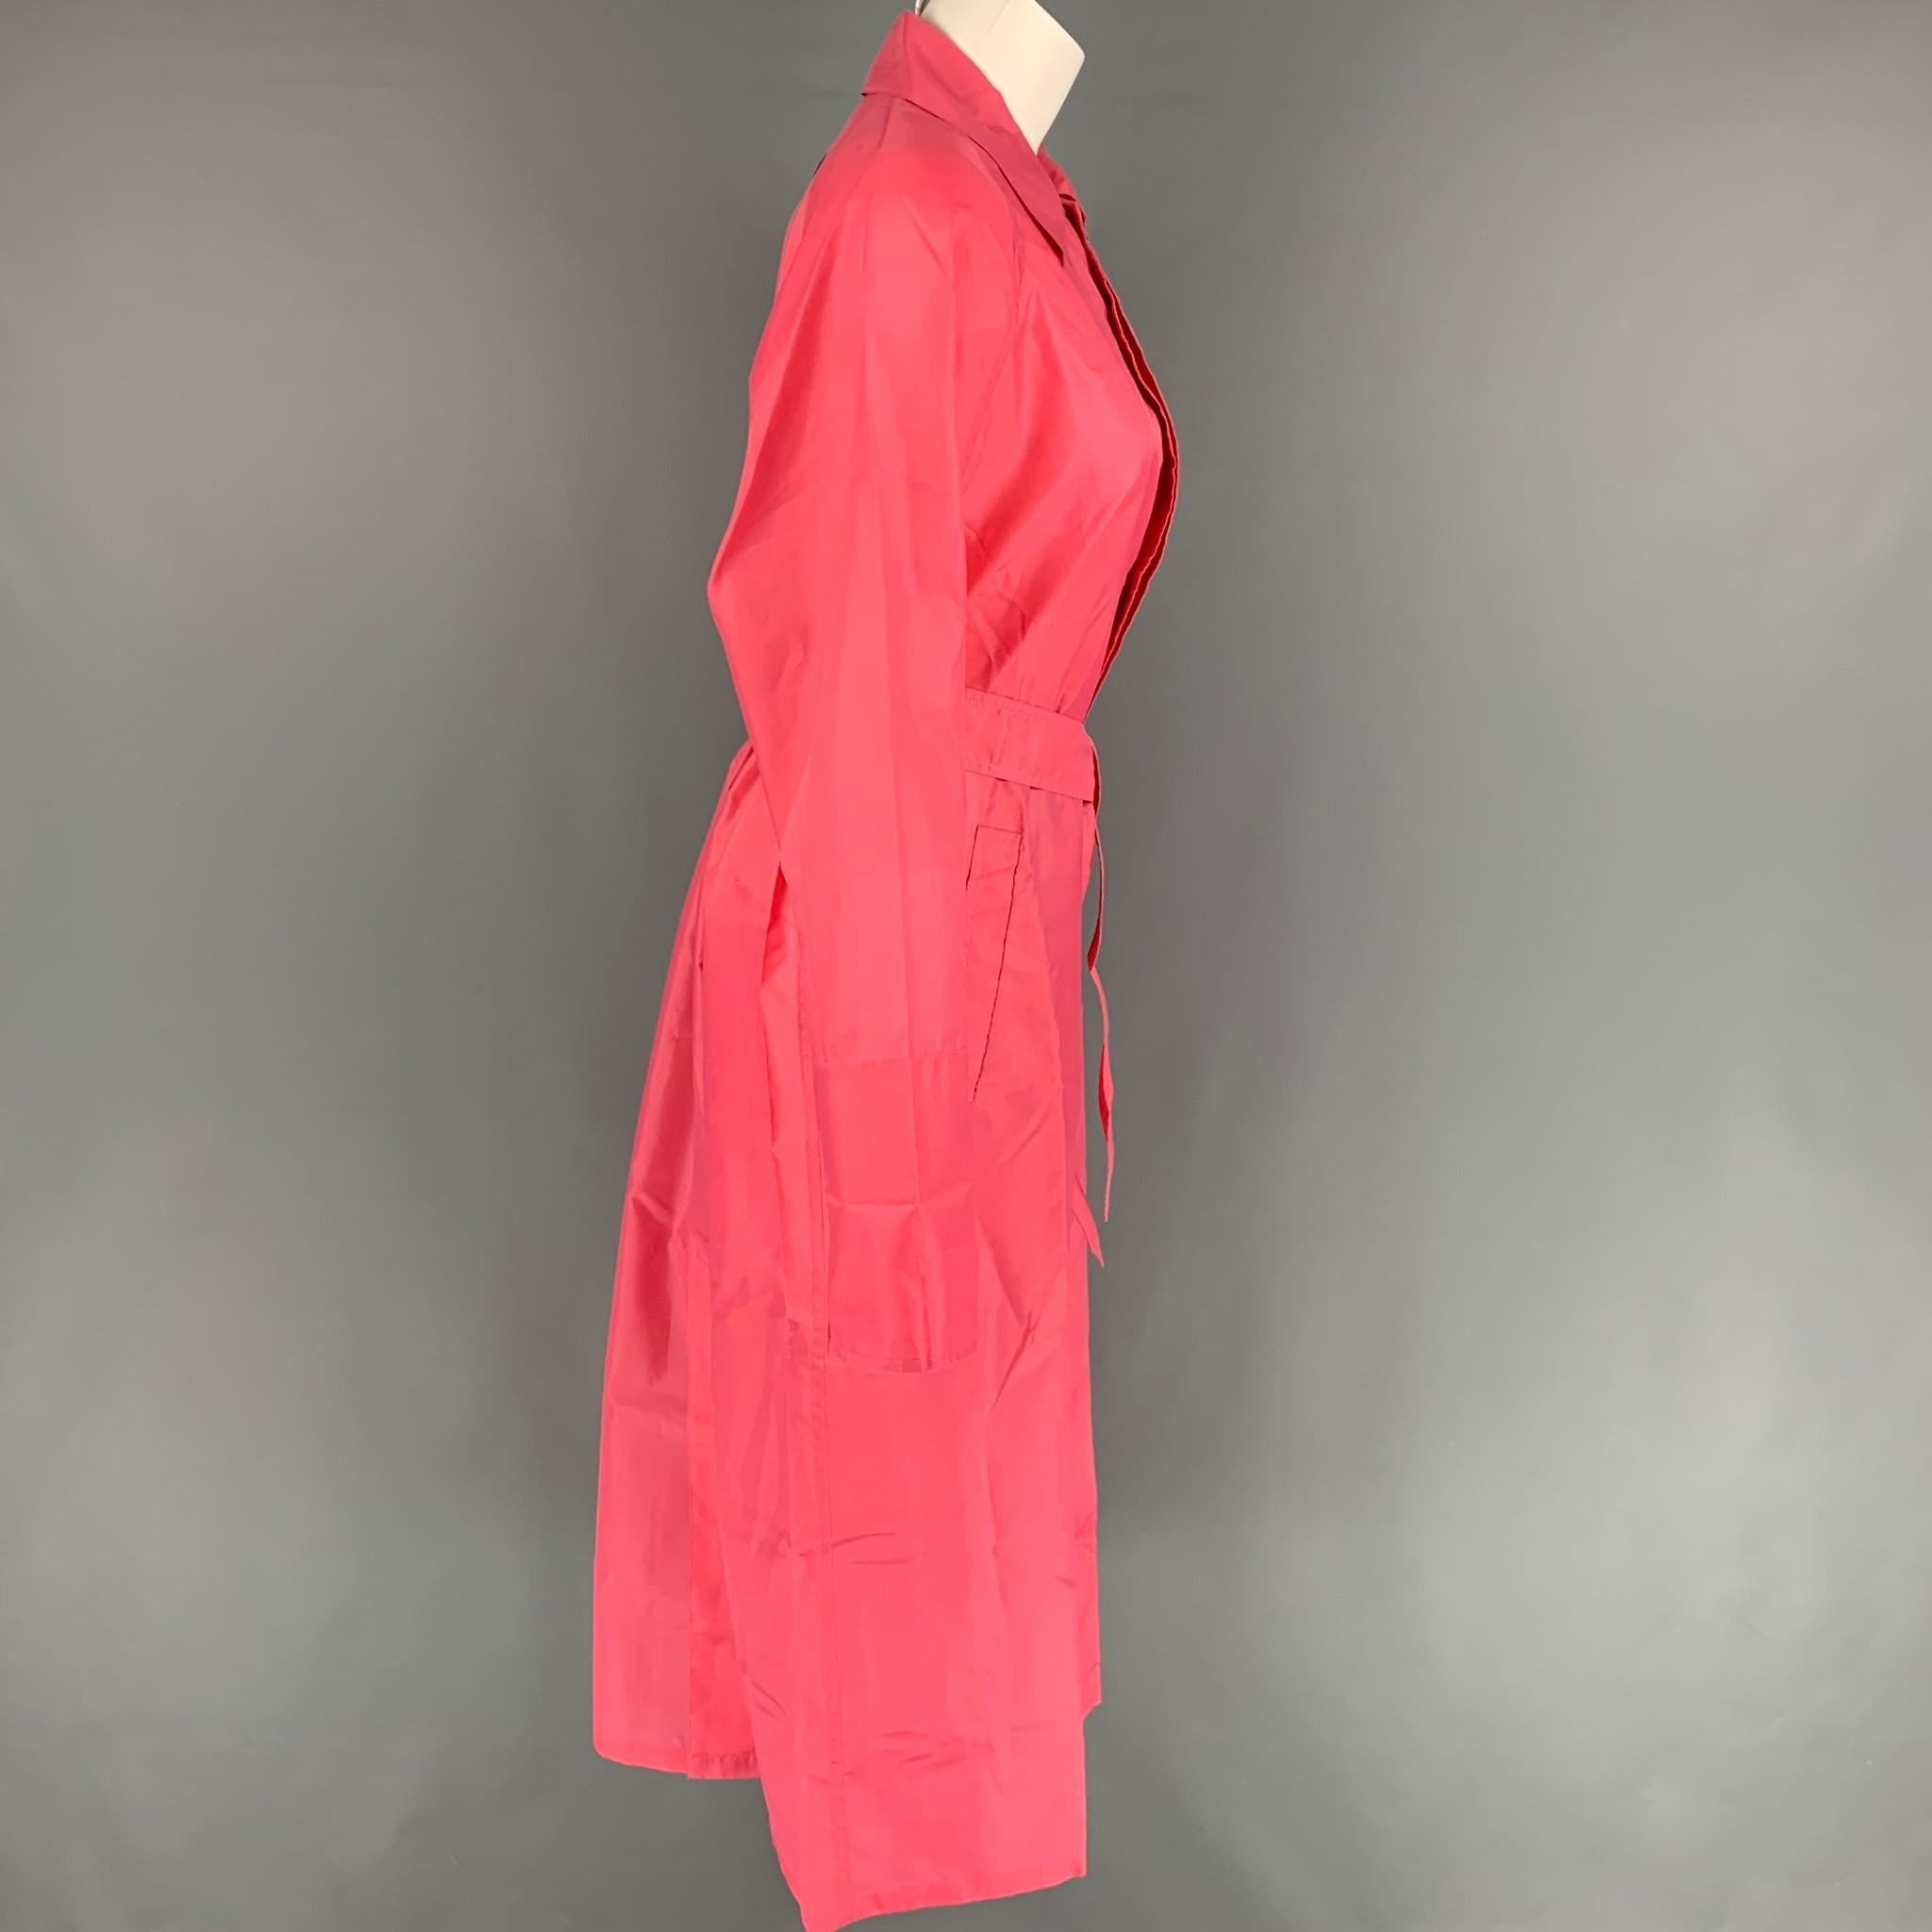 LONGCHAMP raincoat comes in a pink nylon featuring a spread collar, slit pockets, belted, and a hidden placket closure. Comes with pouch.

Very Good Pre-Owned Condition.
Marked: S

Measurements:

Shoulder: 17 in.
Bust: 46 in.
Sleeve: 24 in.
Length: